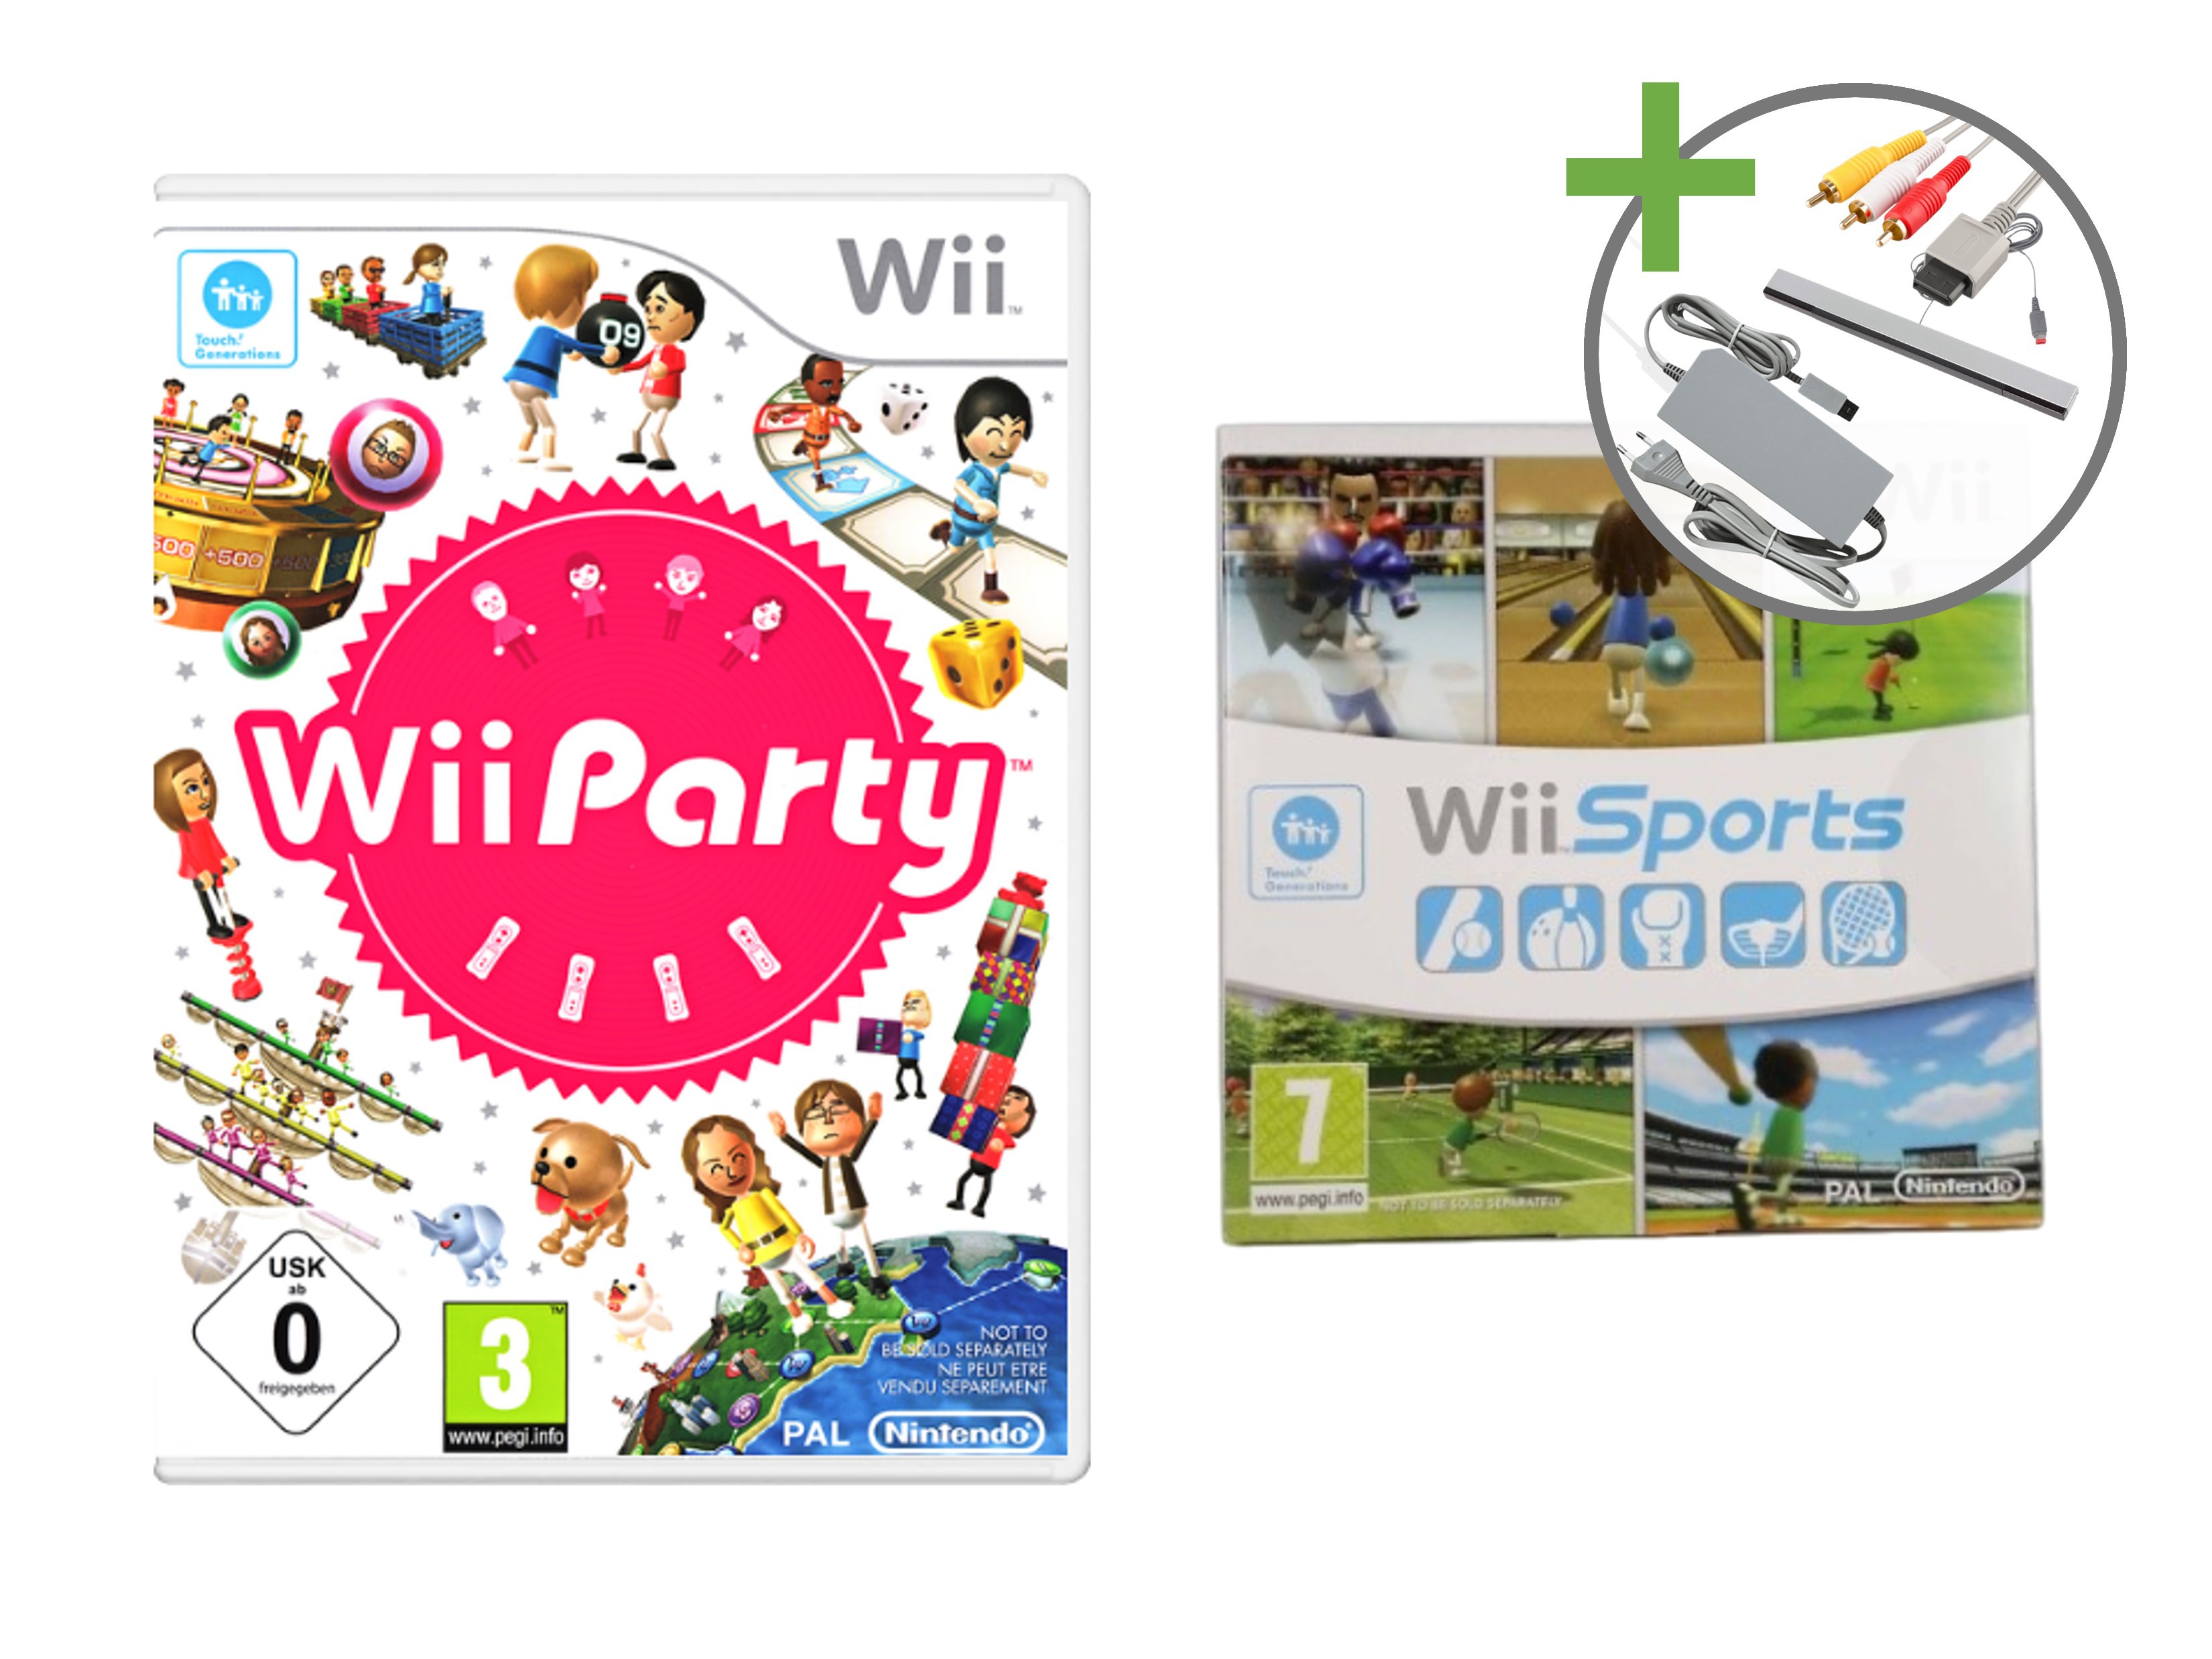 Nintendo Wii Starter Pack - Wii Family Edition - Wii Hardware - 4